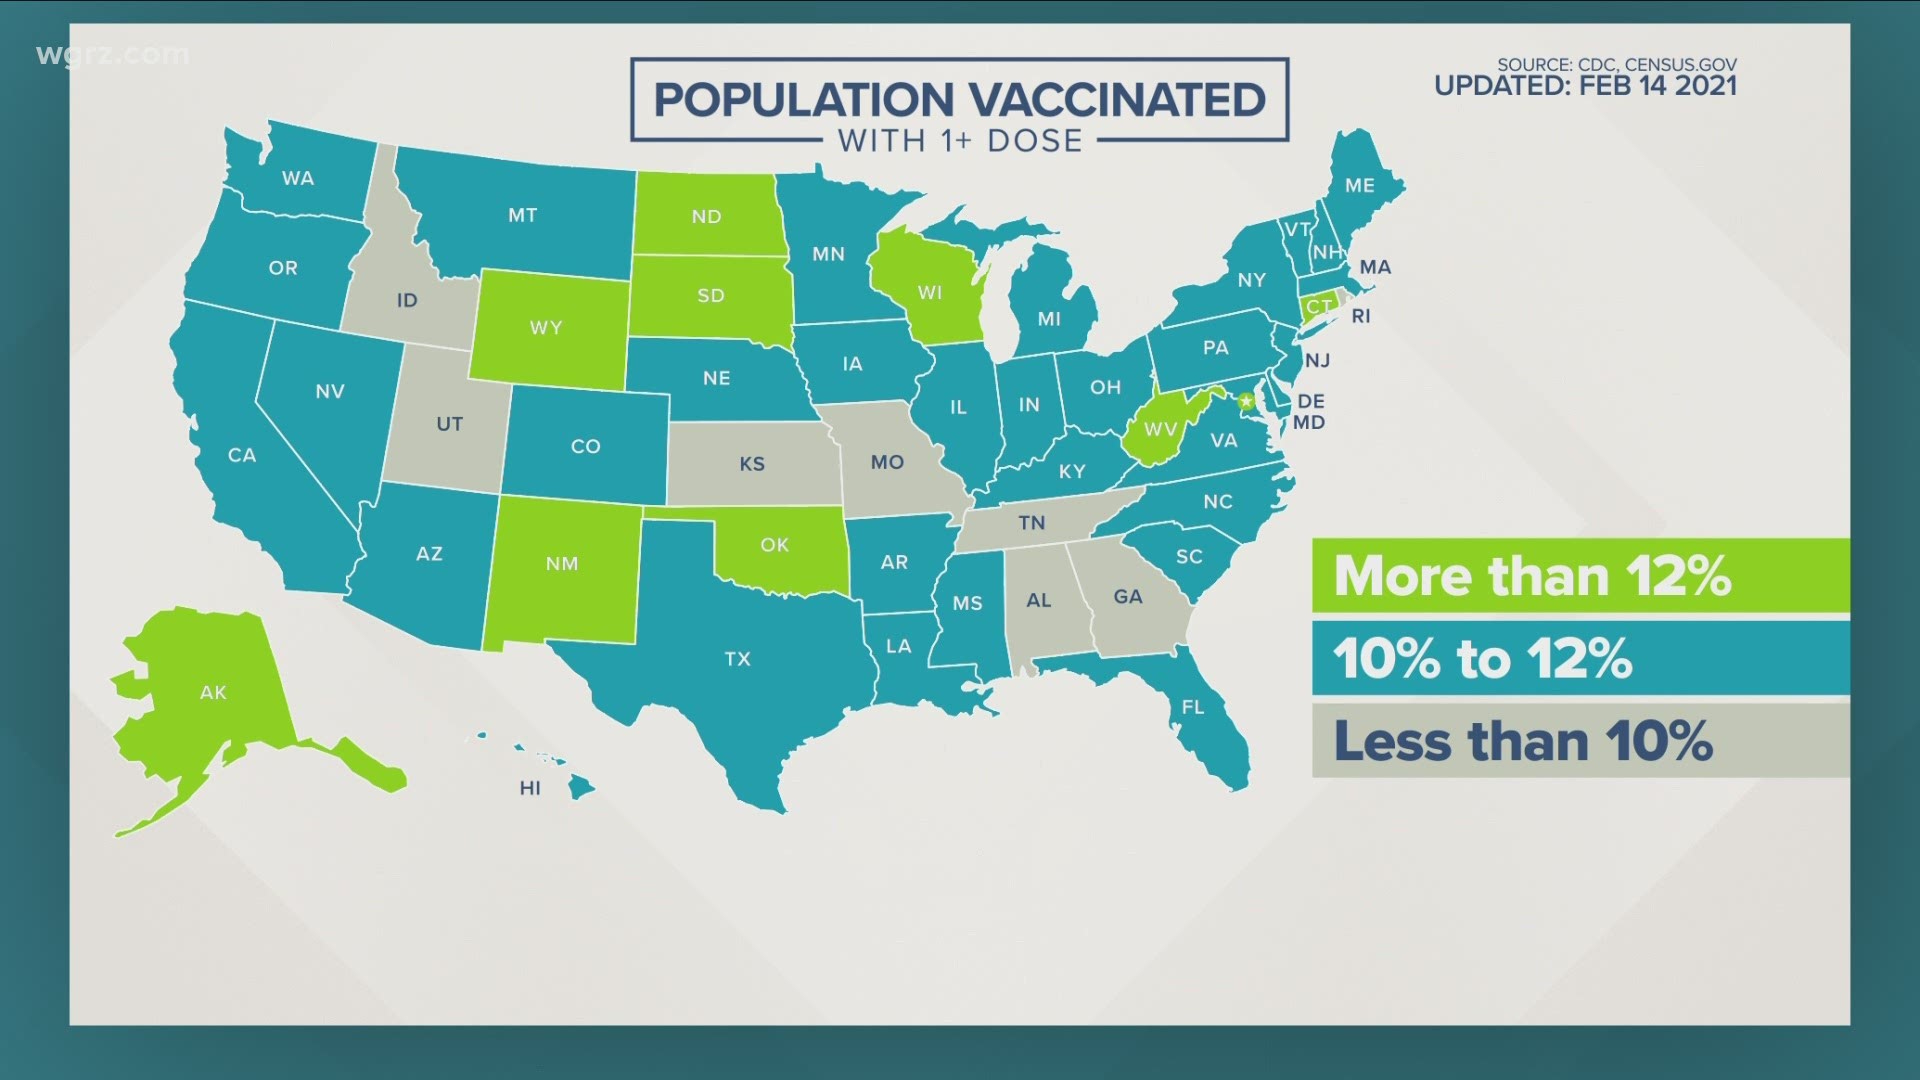 Looking at the vaccine roll-out, the CDC says 10.3% of New Yorkers have gotten at least one dose so far. That puts us among the average for states nationwide.